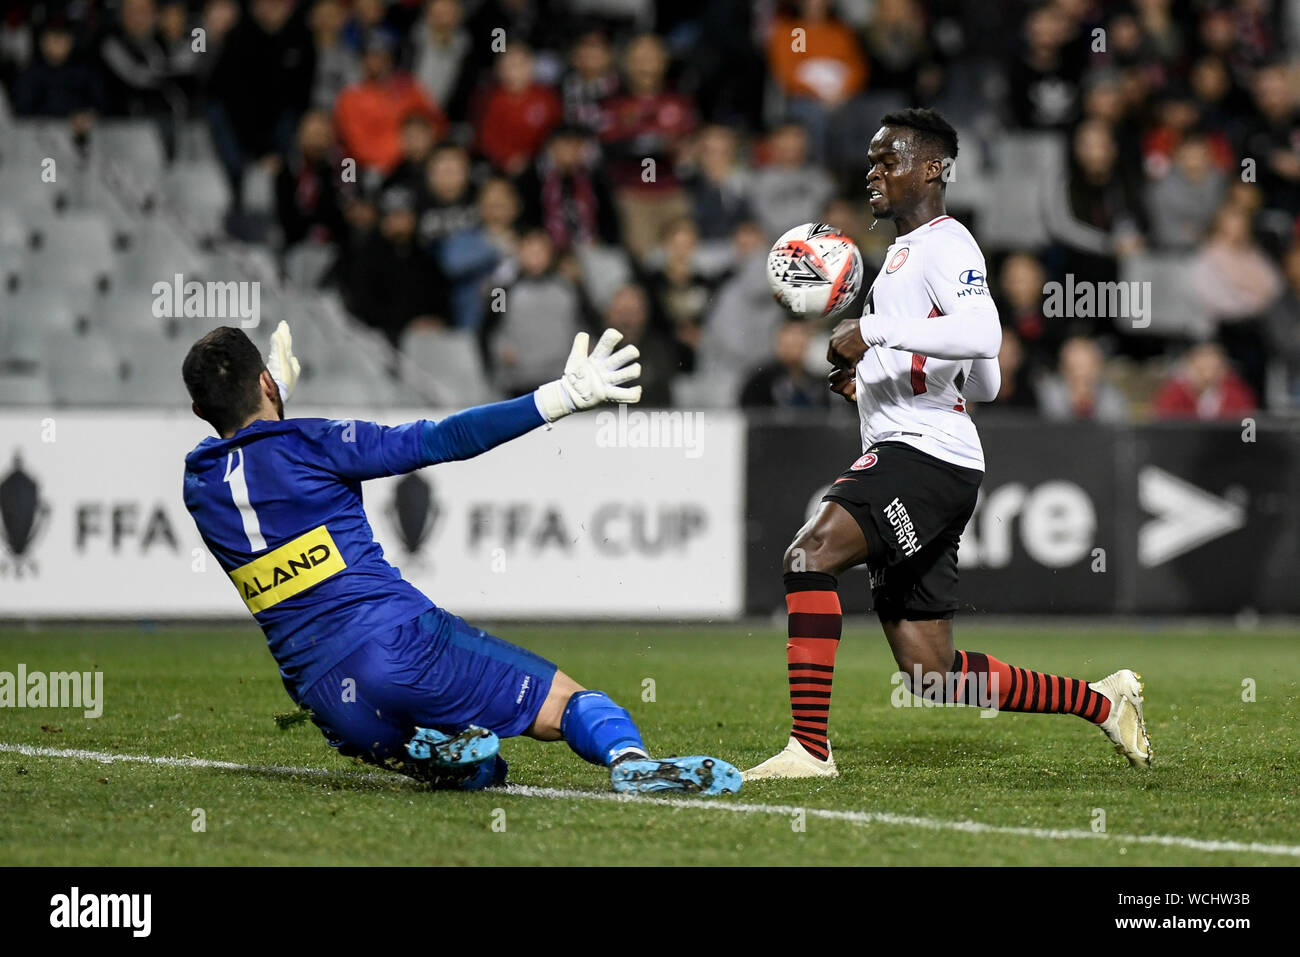 Campbelltown Stadium, Campbelltown, Australia. 28th Aug, 2019. FFA Cup round of 16, Sydney United 58 FC versus Western Sydney Wanderers FC ; Mohamed Adam of Western Sydney Wanderers chips the ball over Daniel Sadaka the advancing keeper - Editorial Use Only. Credit: Action Plus Sports/Alamy Live News Stock Photo